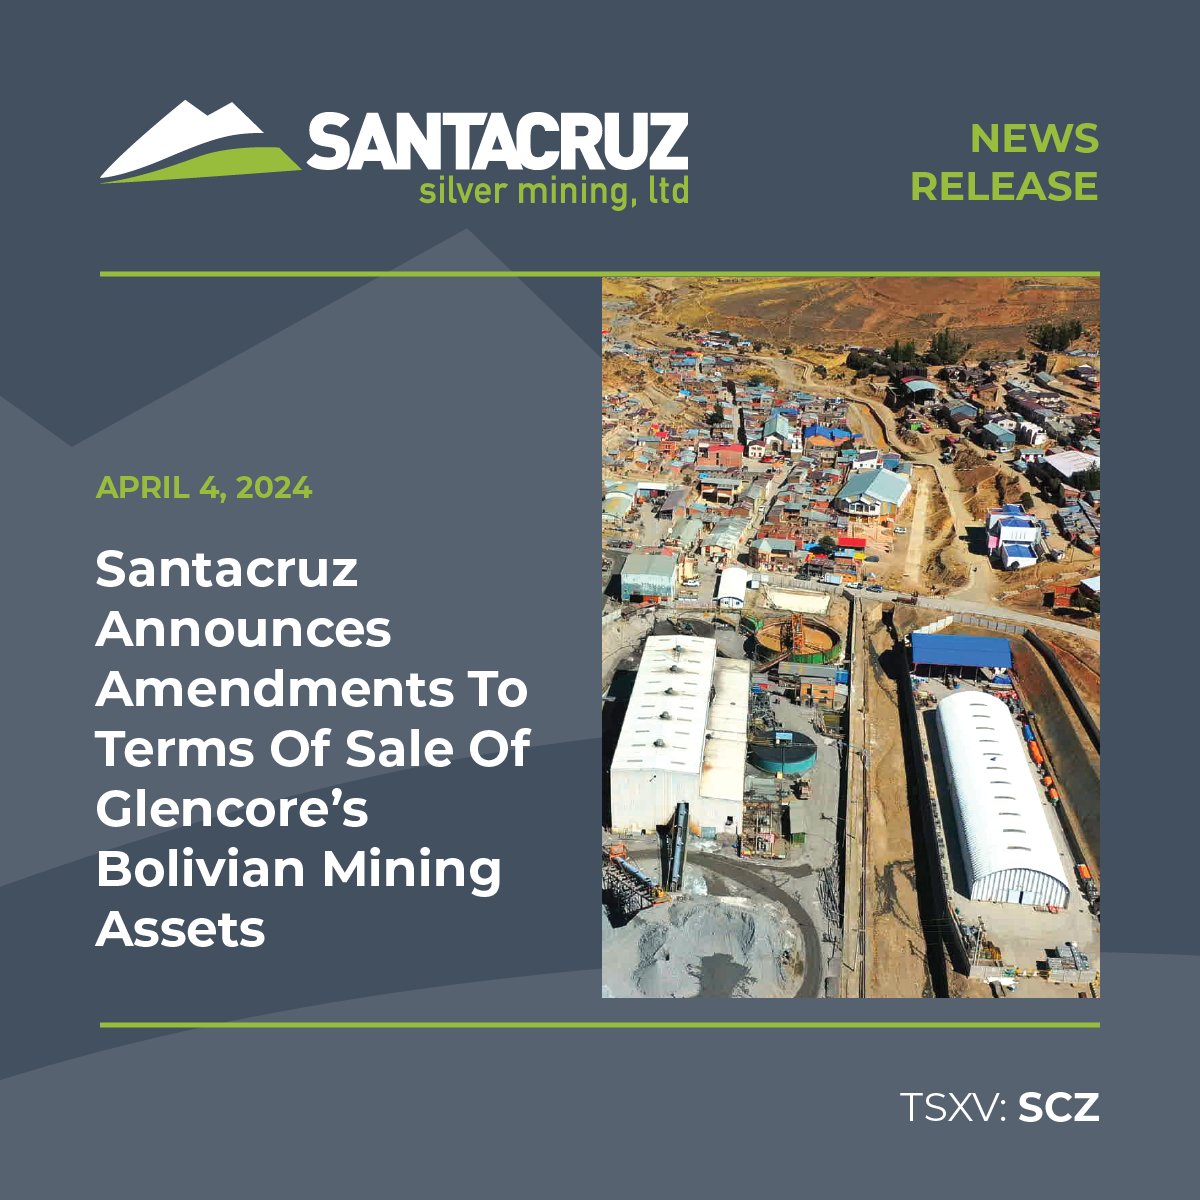 NEWS | #SantacruzSilver is pleased to announce that it has entered into a binding term sheet with @Glencore to amend certain transaction documents in connection with the prior sale by Glencore of its Bolivian mining assets to Santacruz. Read the full news release here ⬇️…